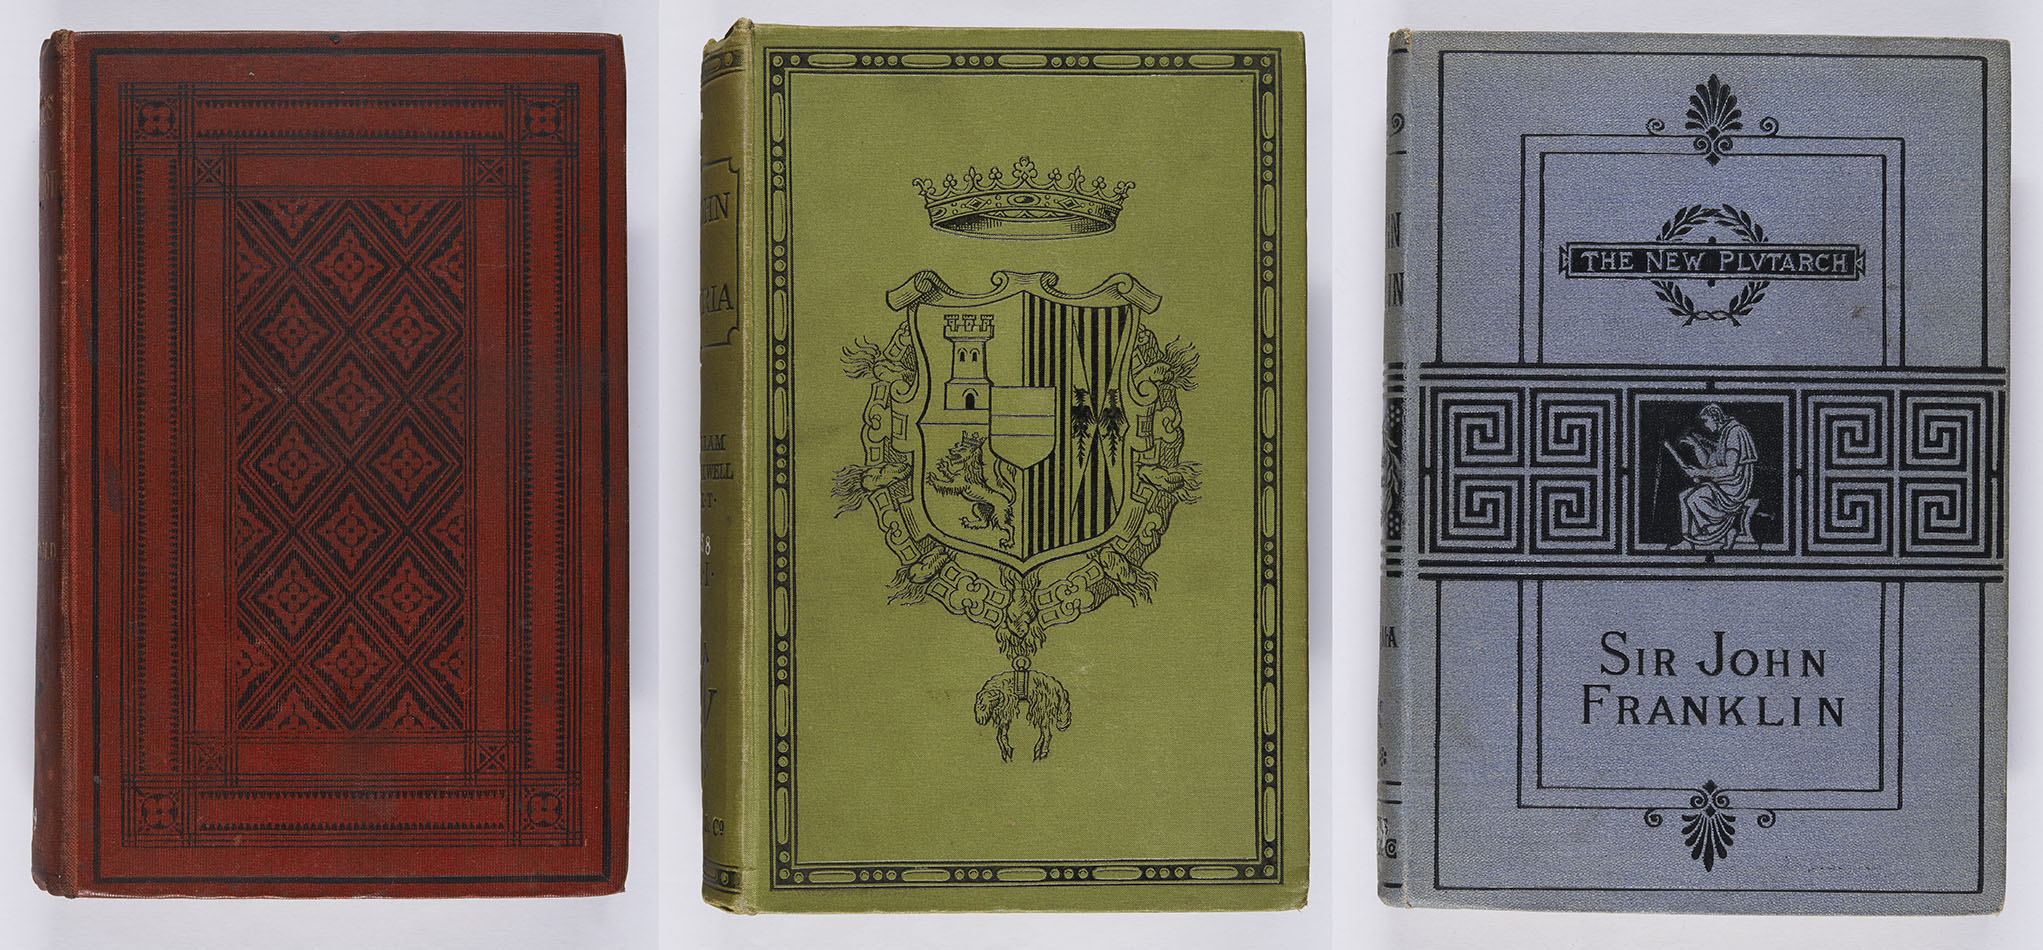 A selection of bindings using black blocking. Andrew Wynter, Curiosities of civilization (London: Robert Hardwicke, 1860), s D10.W9 ; William Stirling Maxwell, Don John of Austria, 2 vol. (London: Longman, Green, and Co., 1883), s DH193.S8 ; A. H. Beesly, Sir John Franklin (London: Marcus Ward & Co., 1881), r G650.1B4. 